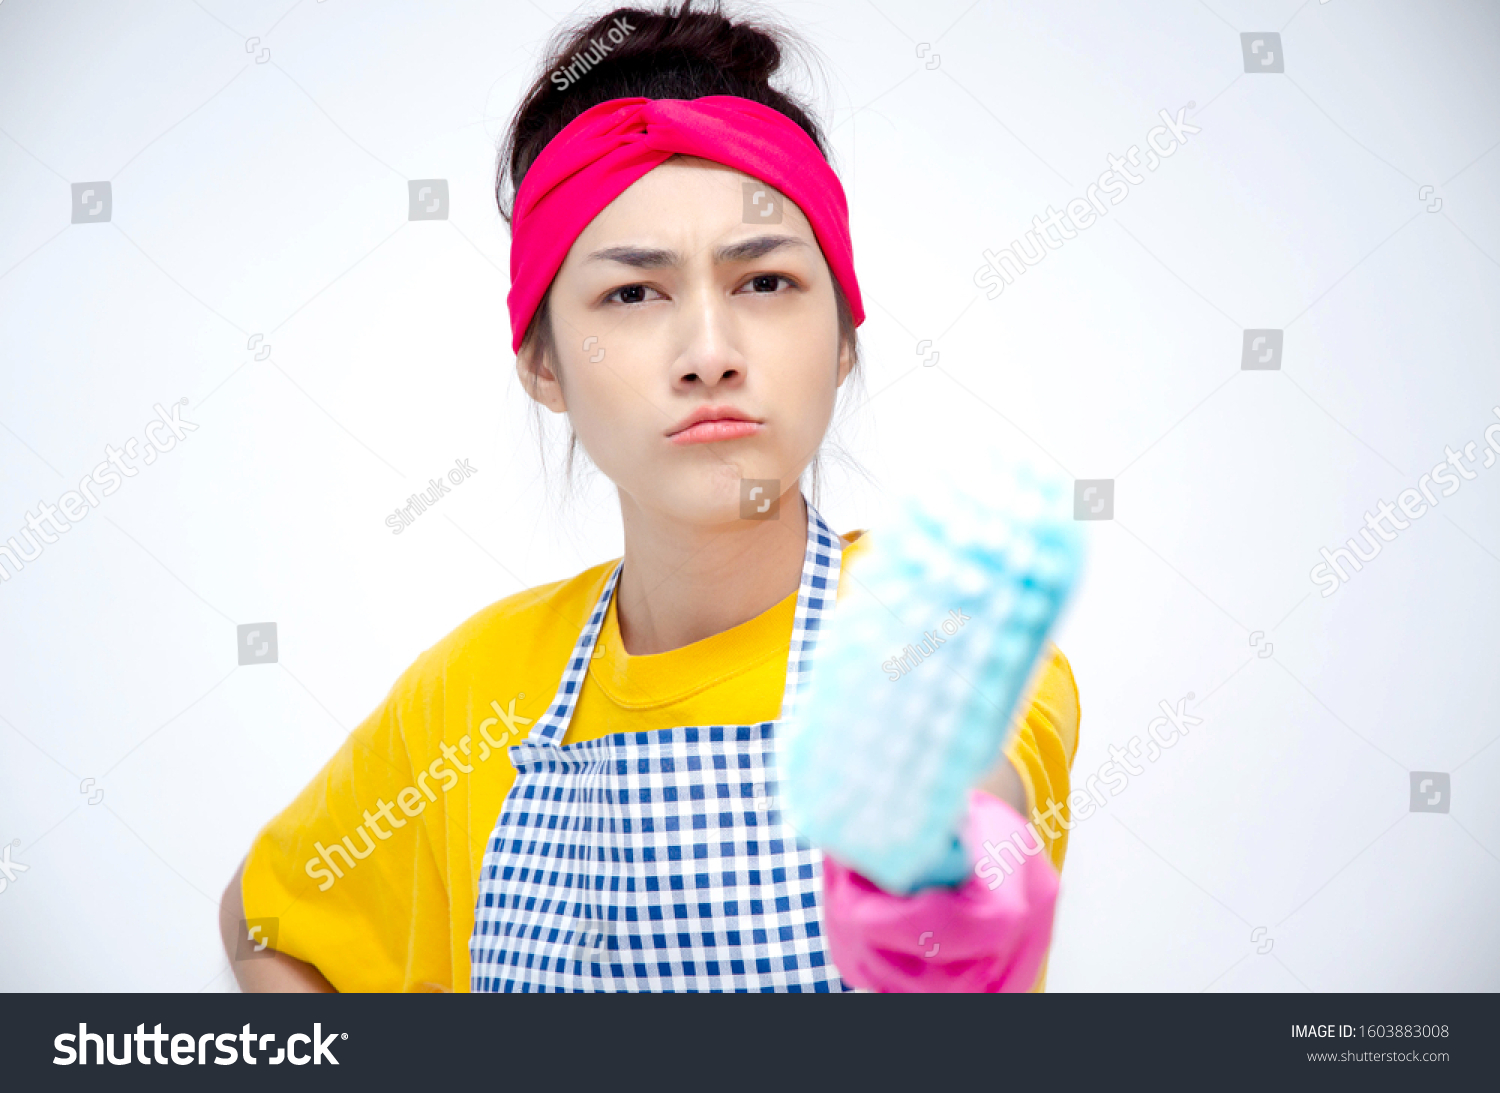 The housewife wears yellow clothes, wears an apron, wears pink gloves, stands for the index finger and makes stressful faces. Copy area. #1603883008